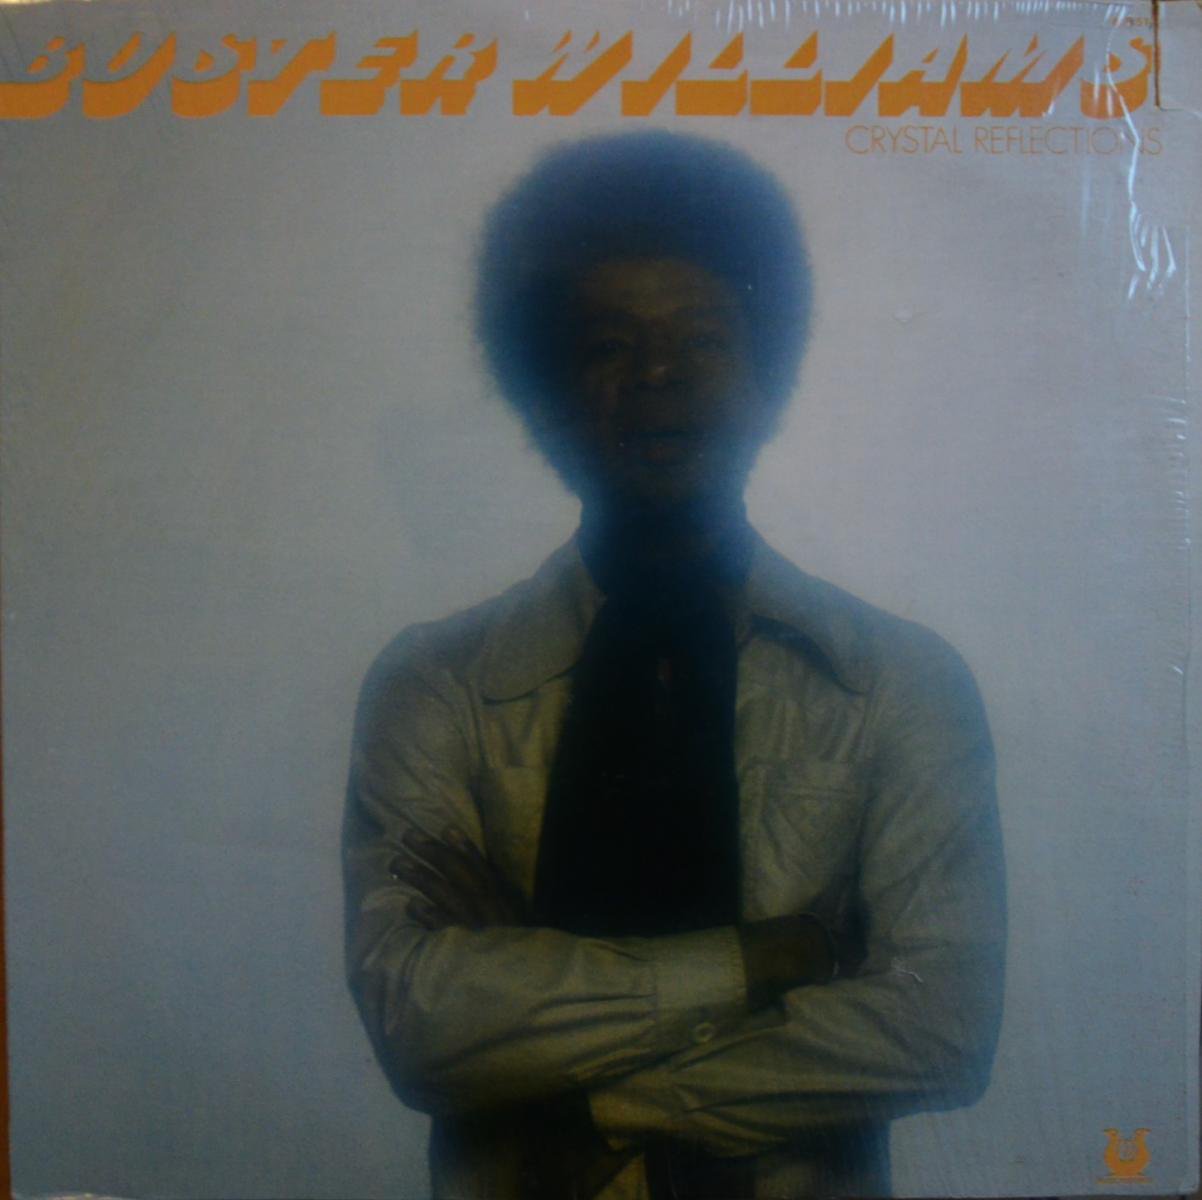 BUSTER WILLIAMS / CRYSTAL REFLECTIONS (LP)